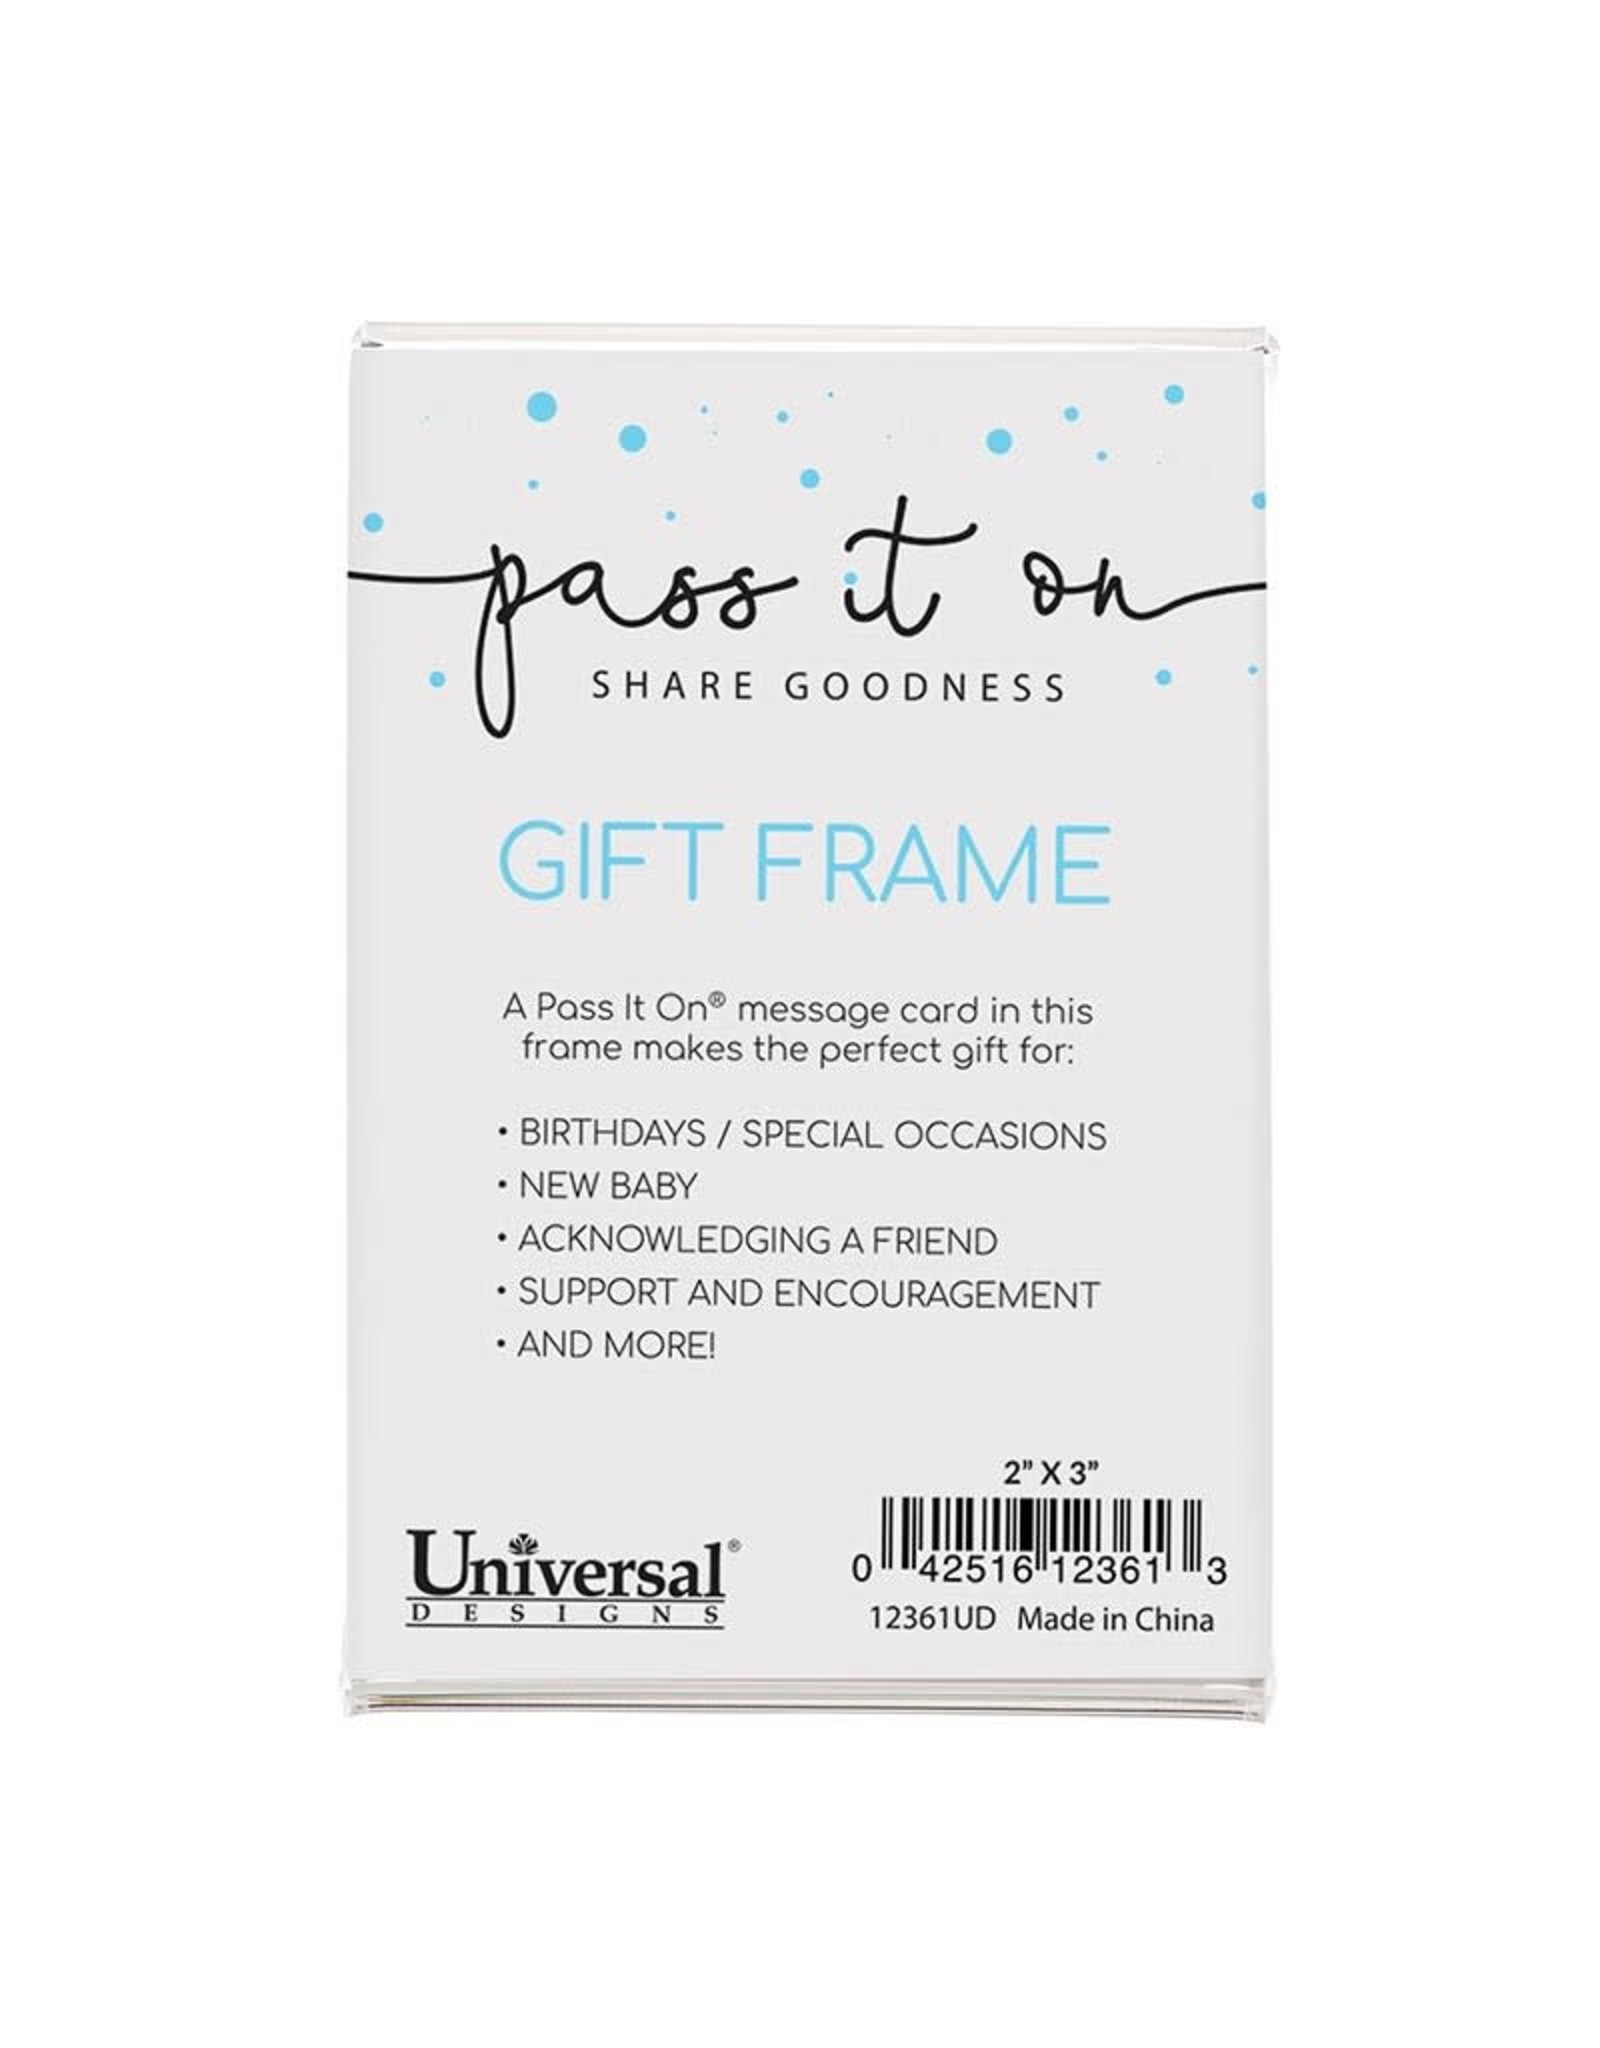 Christian Brands Frame (Vertical) for Pass It On